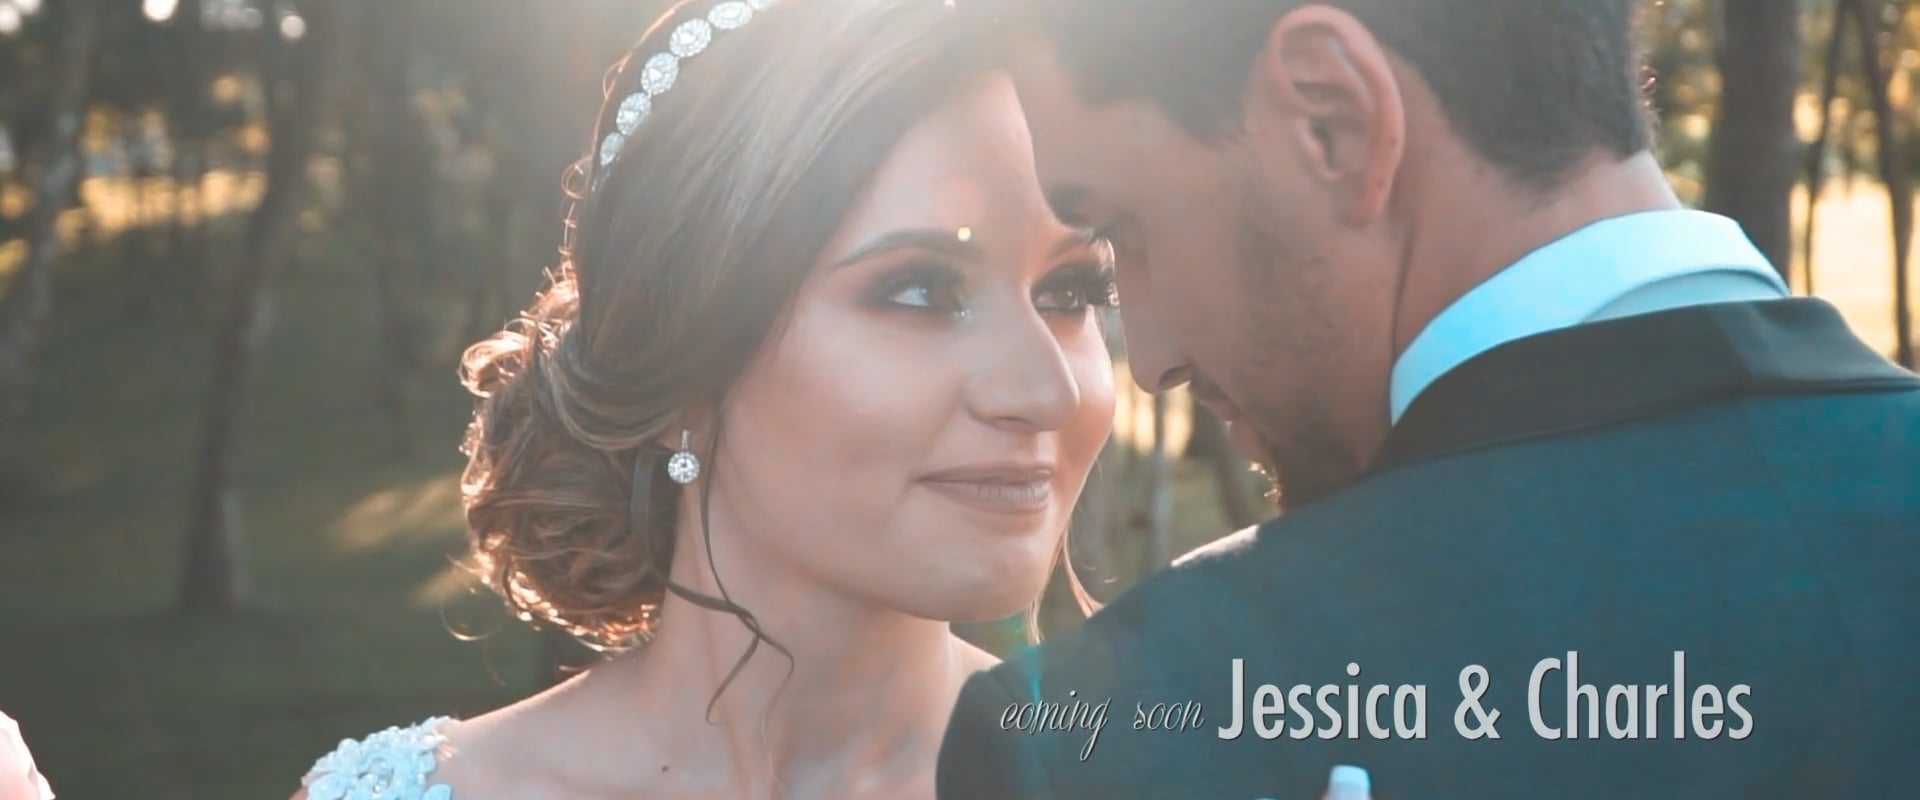 coming soon_Jessica & Charles